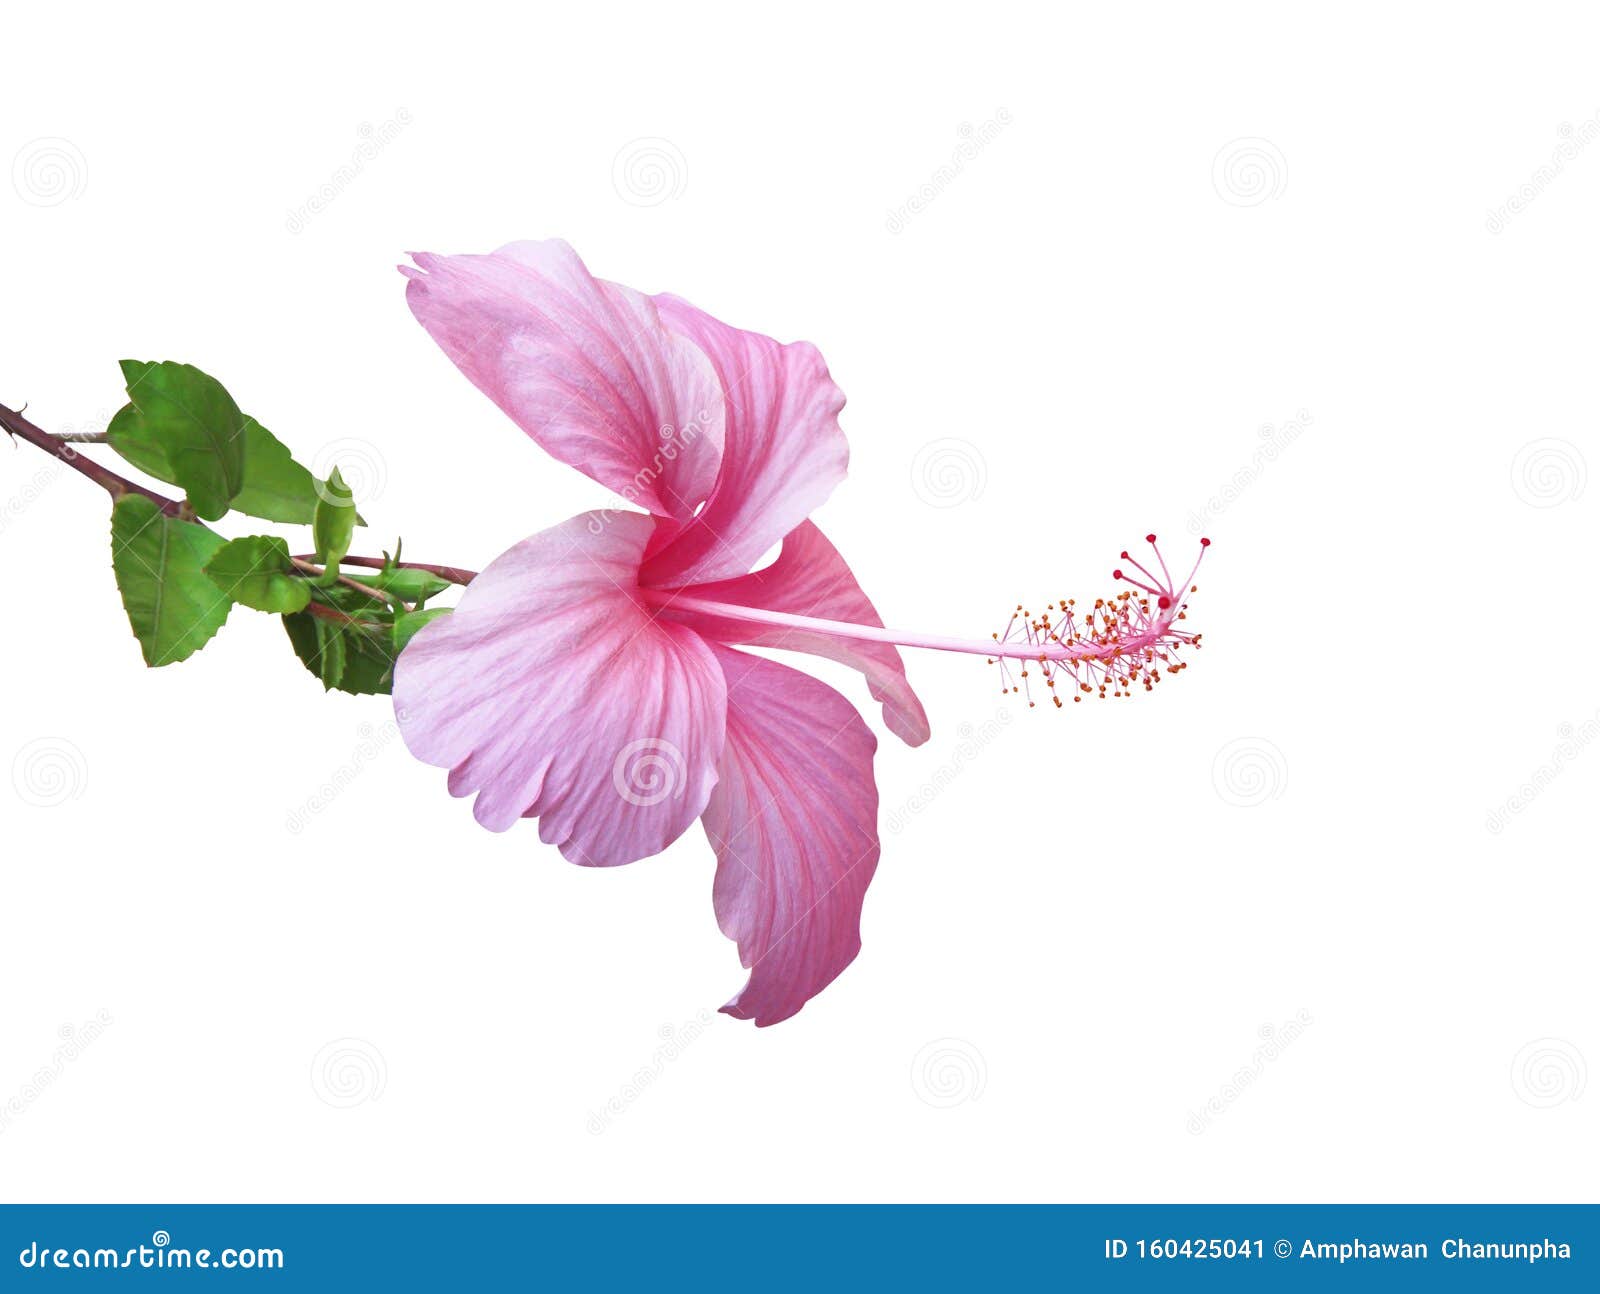 fresh  hibiscus rosa sinensis flowers pink color petal blooming with long pollen patterns and green stem leaves  on white